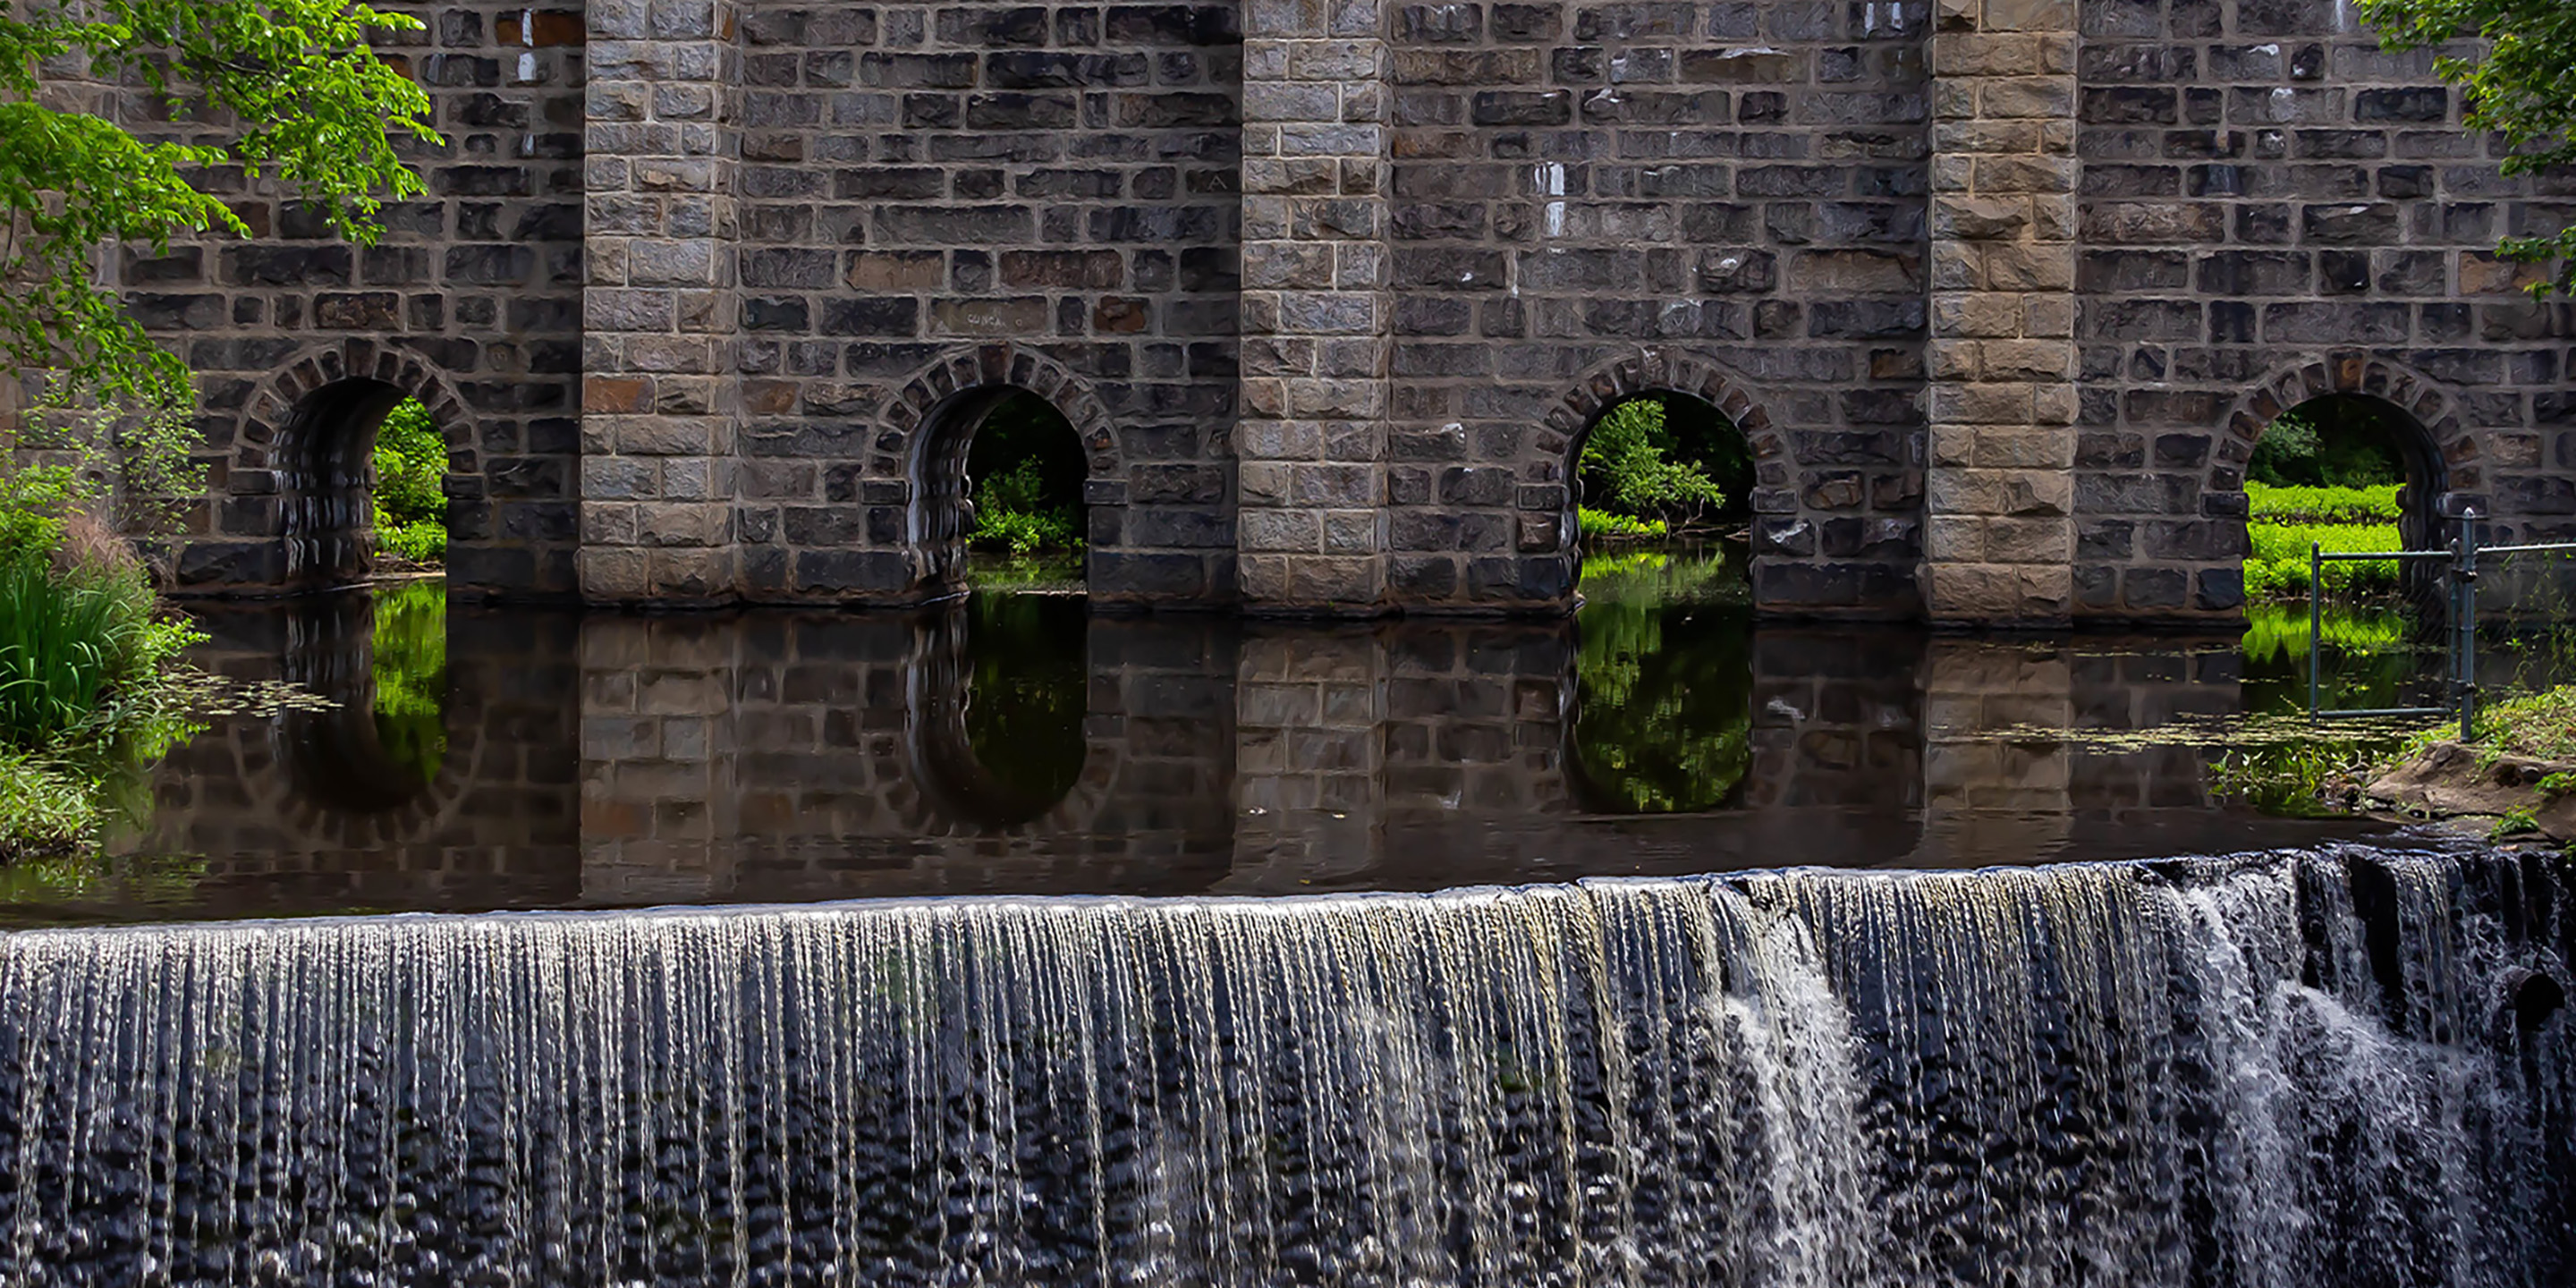 Water flowing through the Canton Viaduct, an arched stone railroad viaduct, and cascading down a spillover.